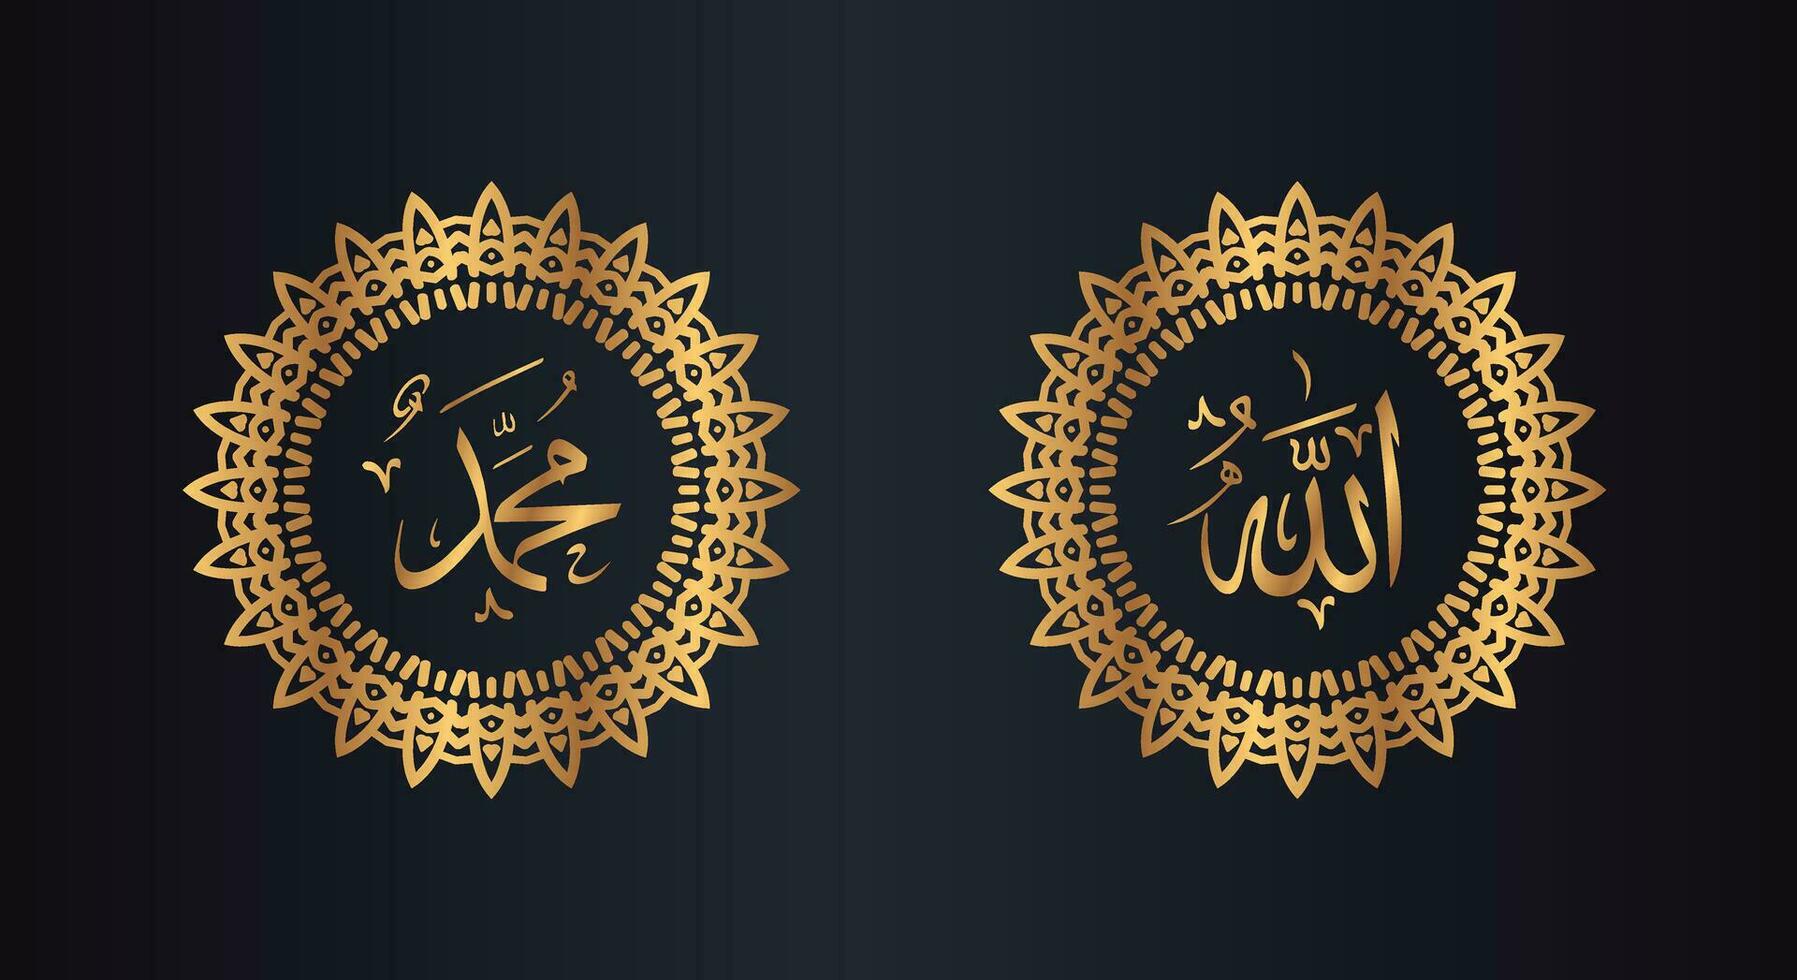 allah muhammad arabic calligraphy with circle frame and golden color with black background vector